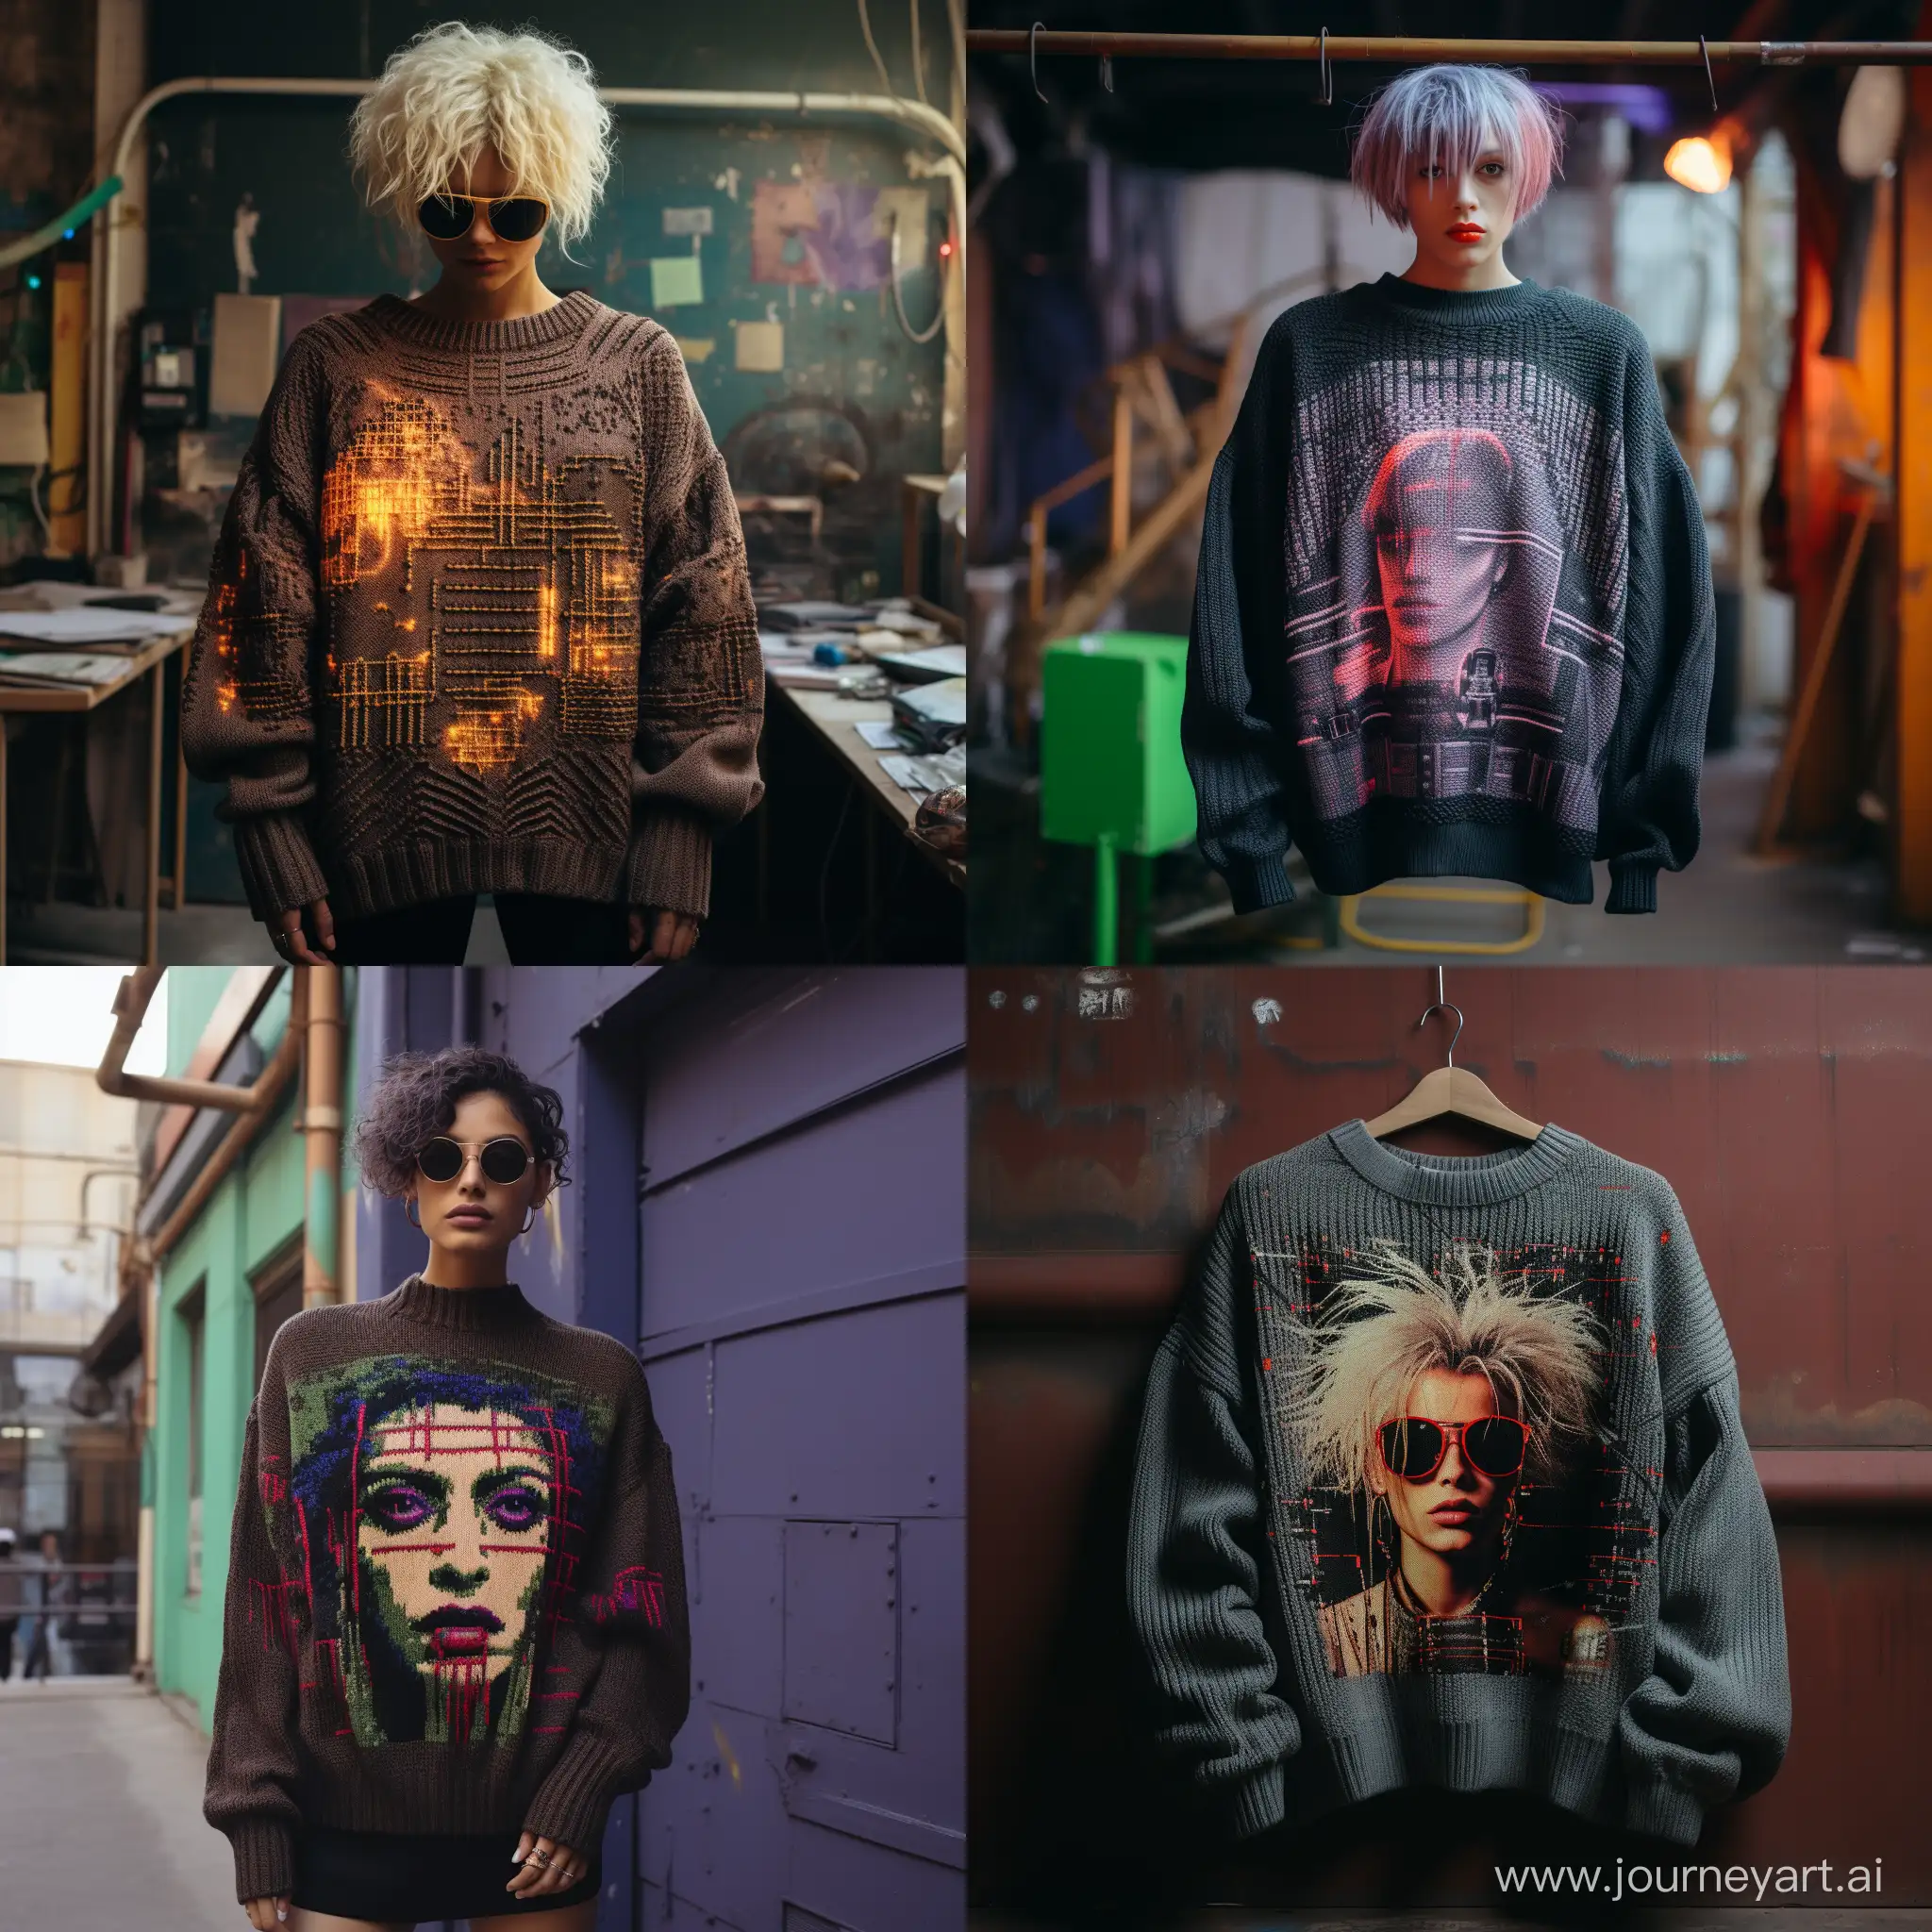 Cyberpunk-80s-Oversize-Knitted-Sweater-with-WorldControlled-Computer-Image